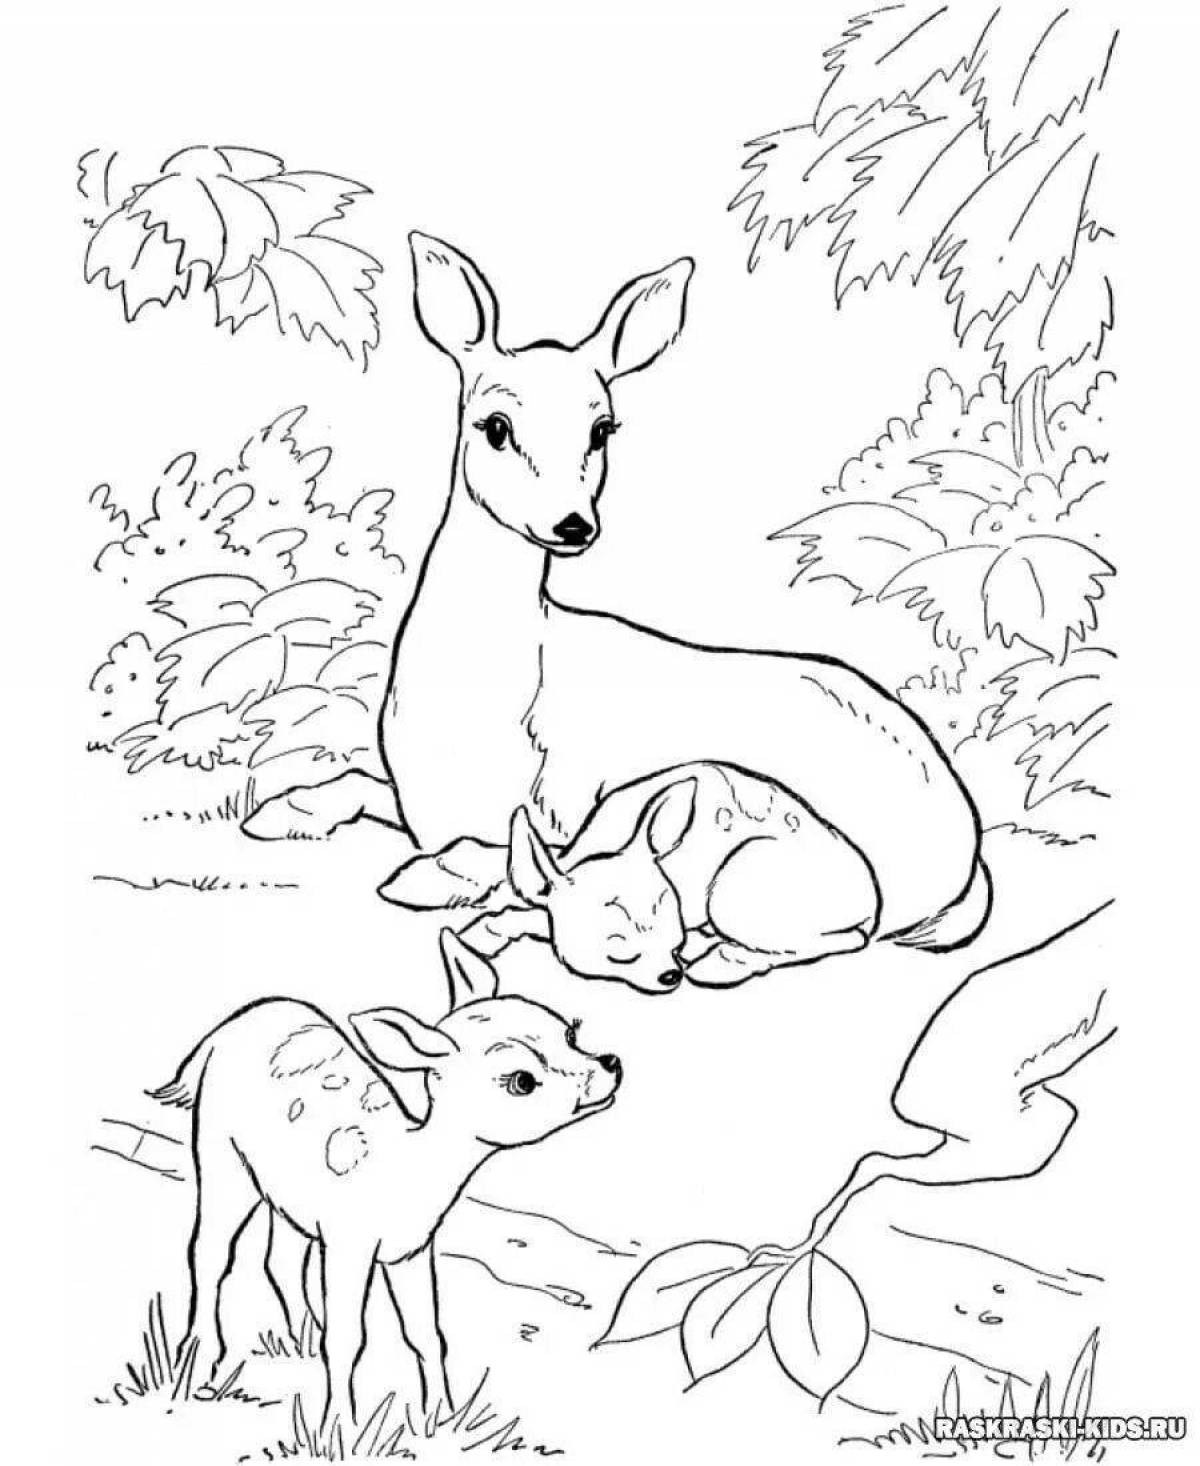 Live coloring of wild animals and babies